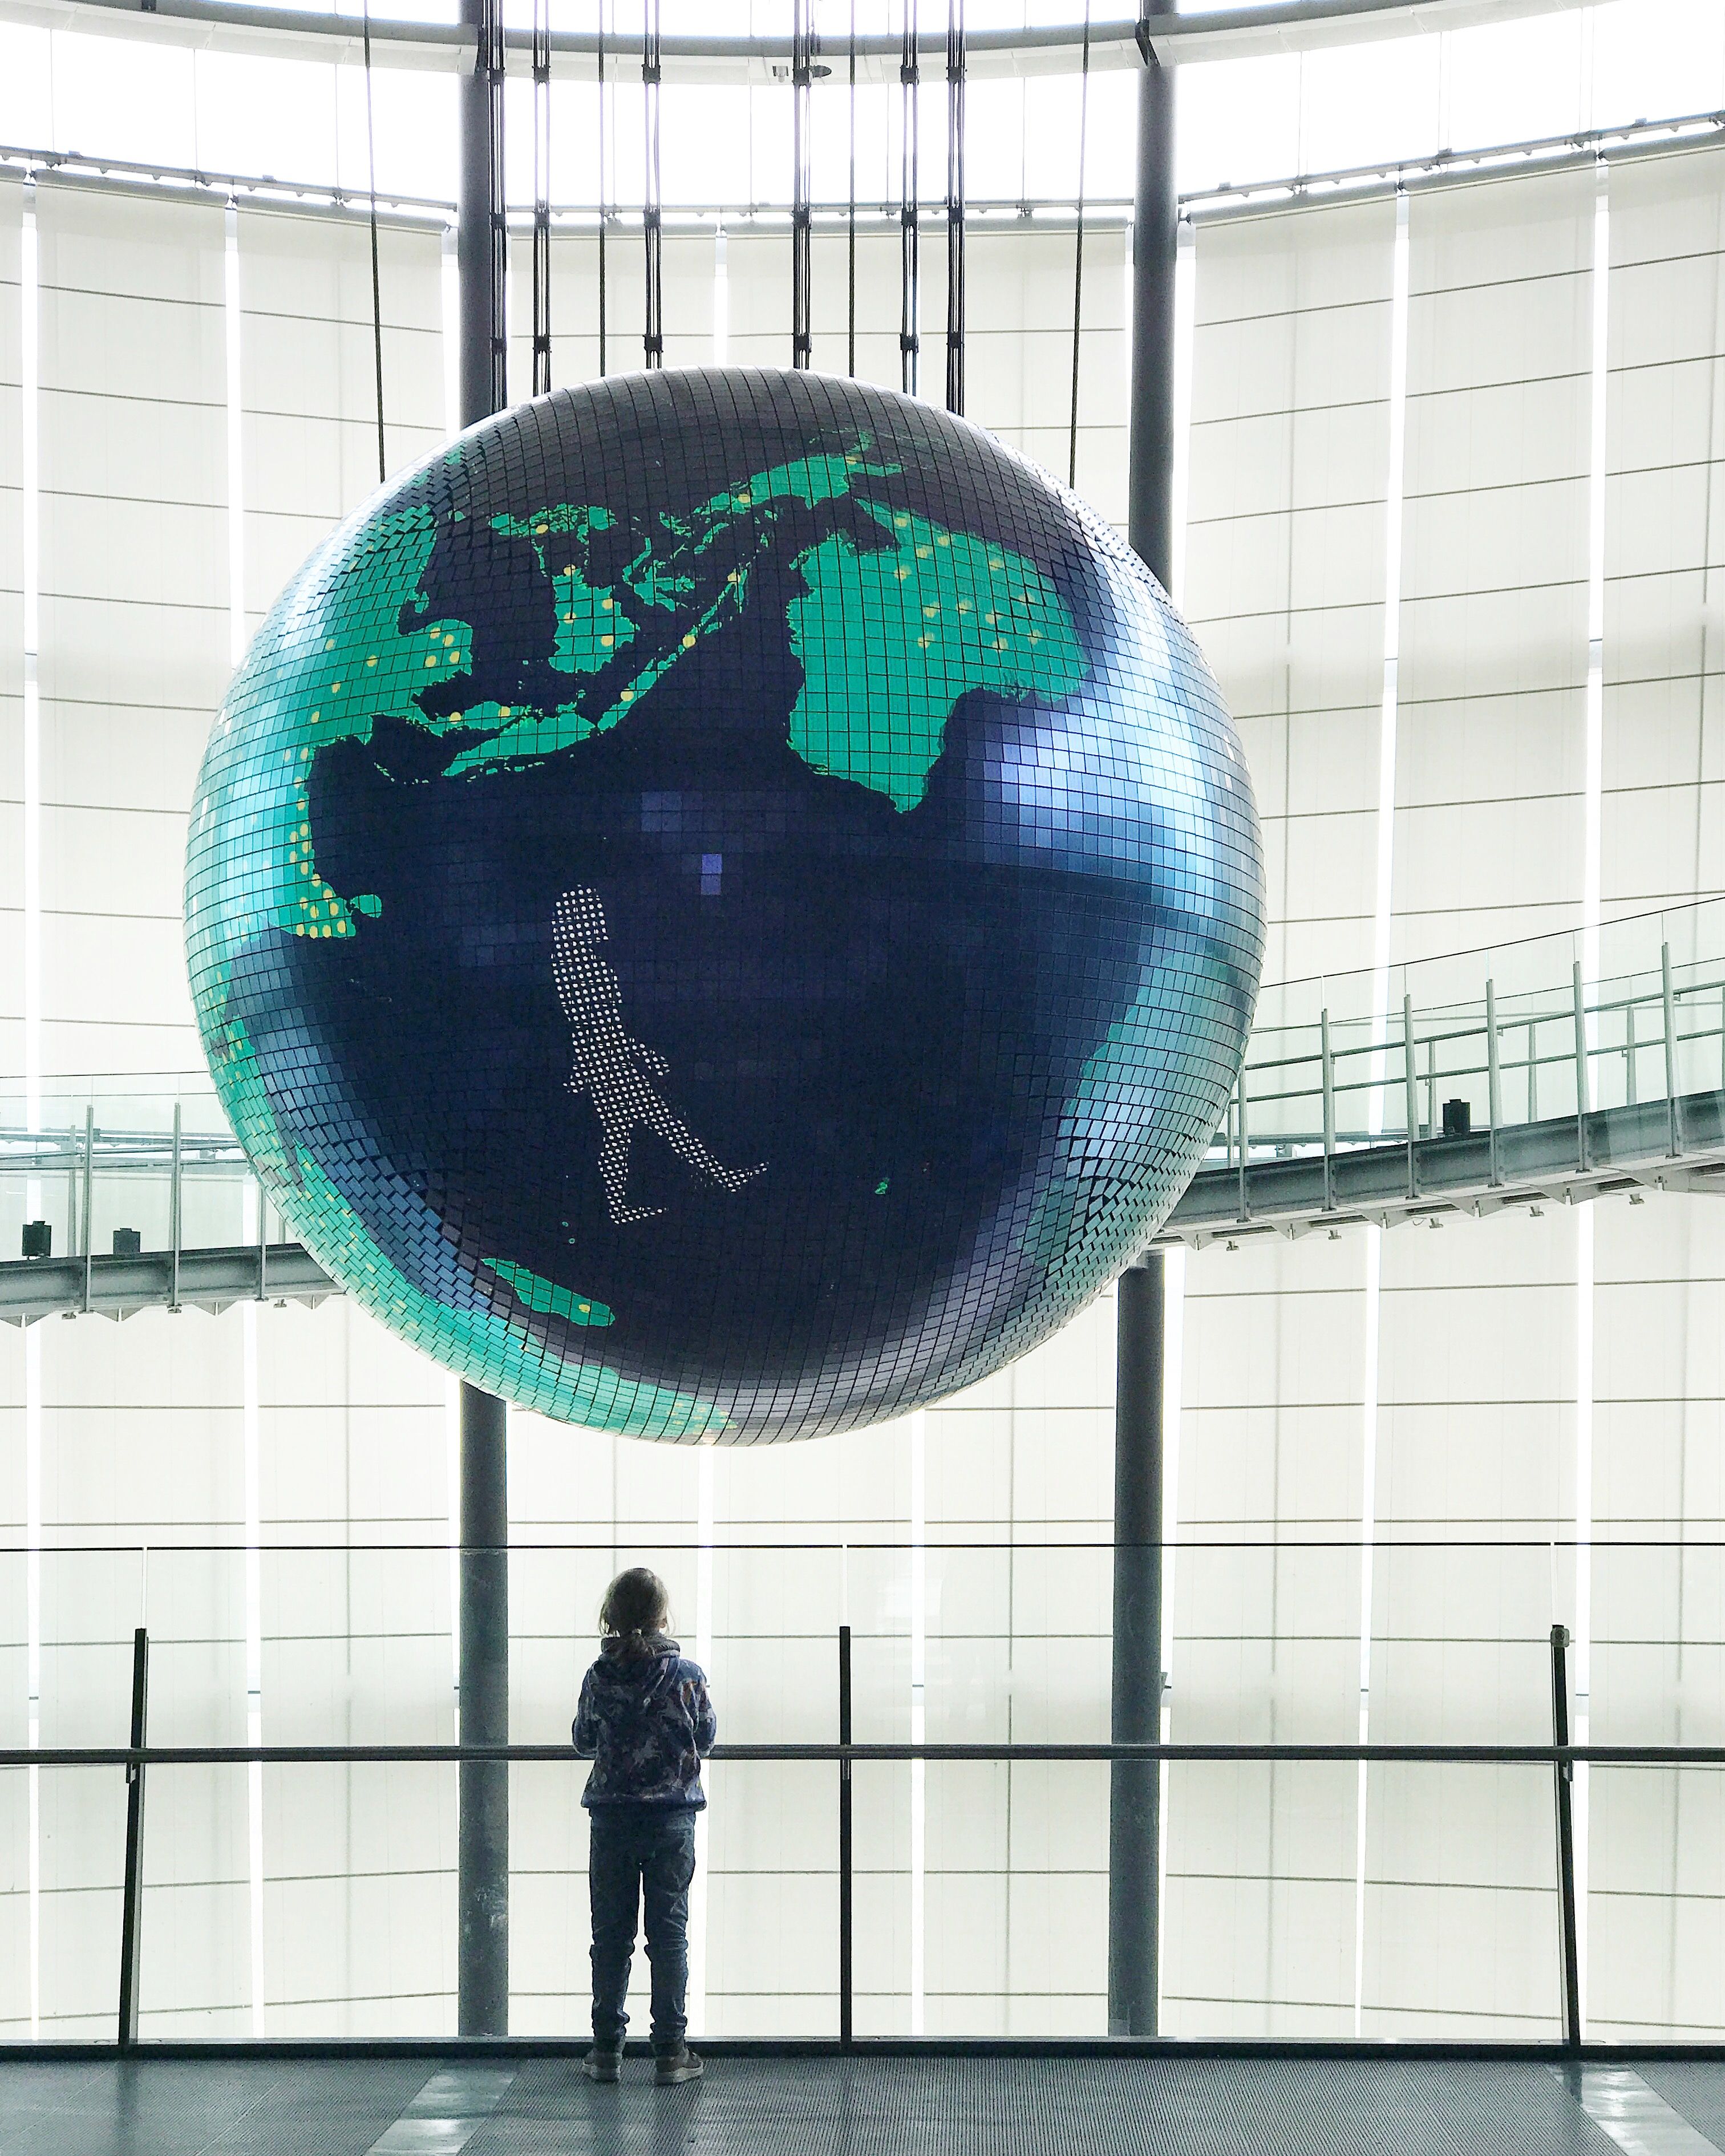 Person standing under a globe installation at the Miraikan Museum in Tokyo Japan